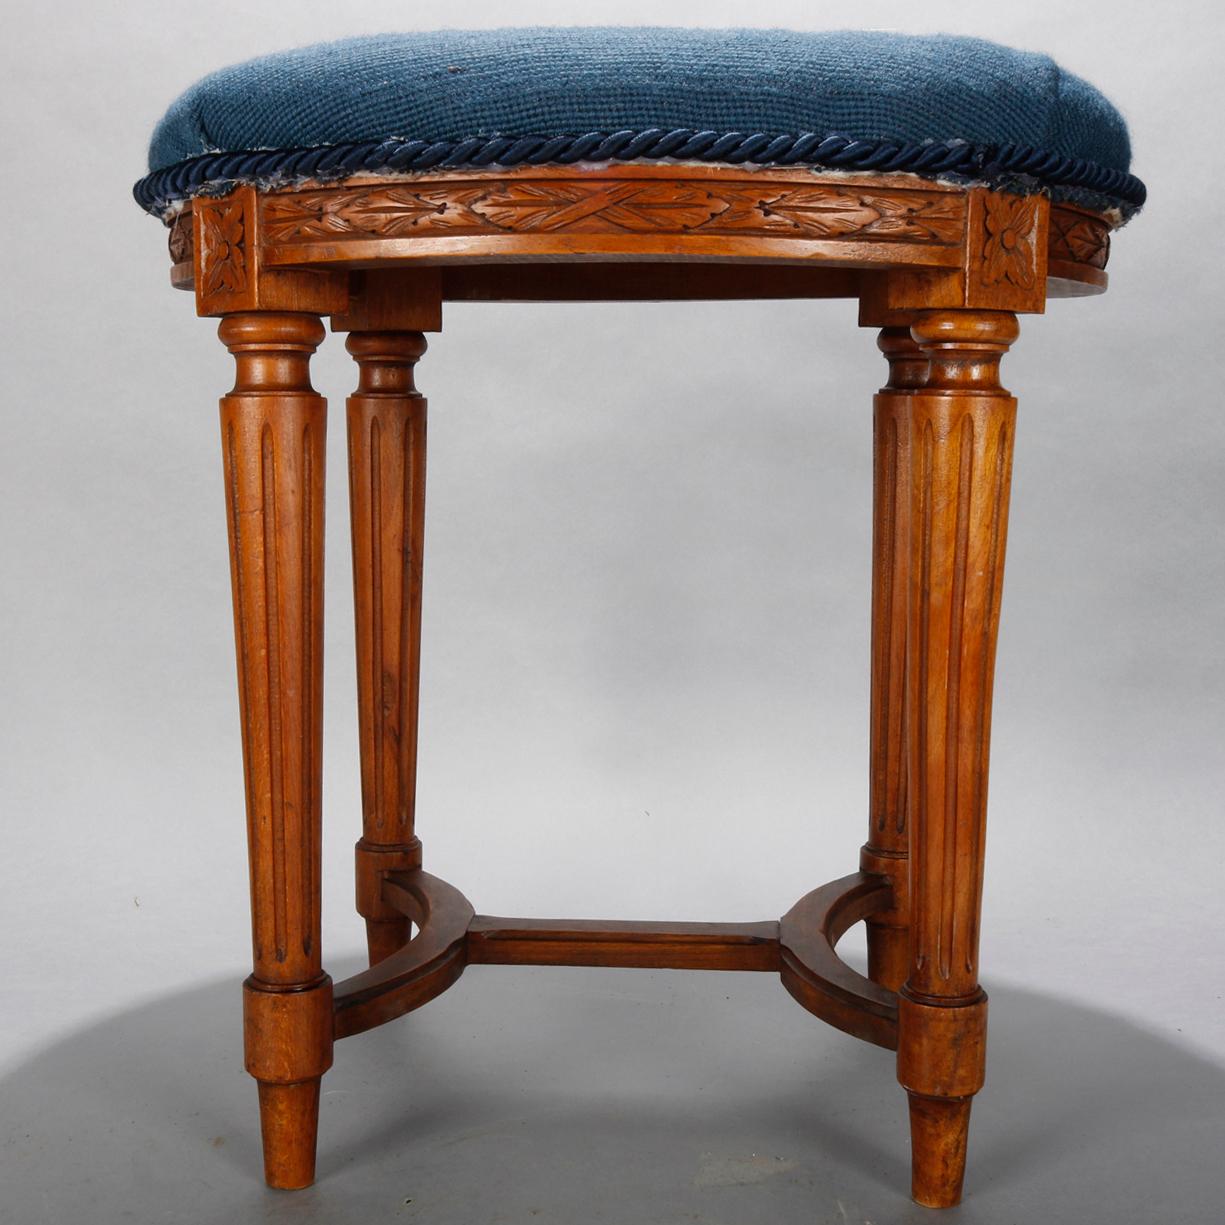 Carved Antique French Louis XVI Fruitwood and Needlepoint Stool, 19th Century